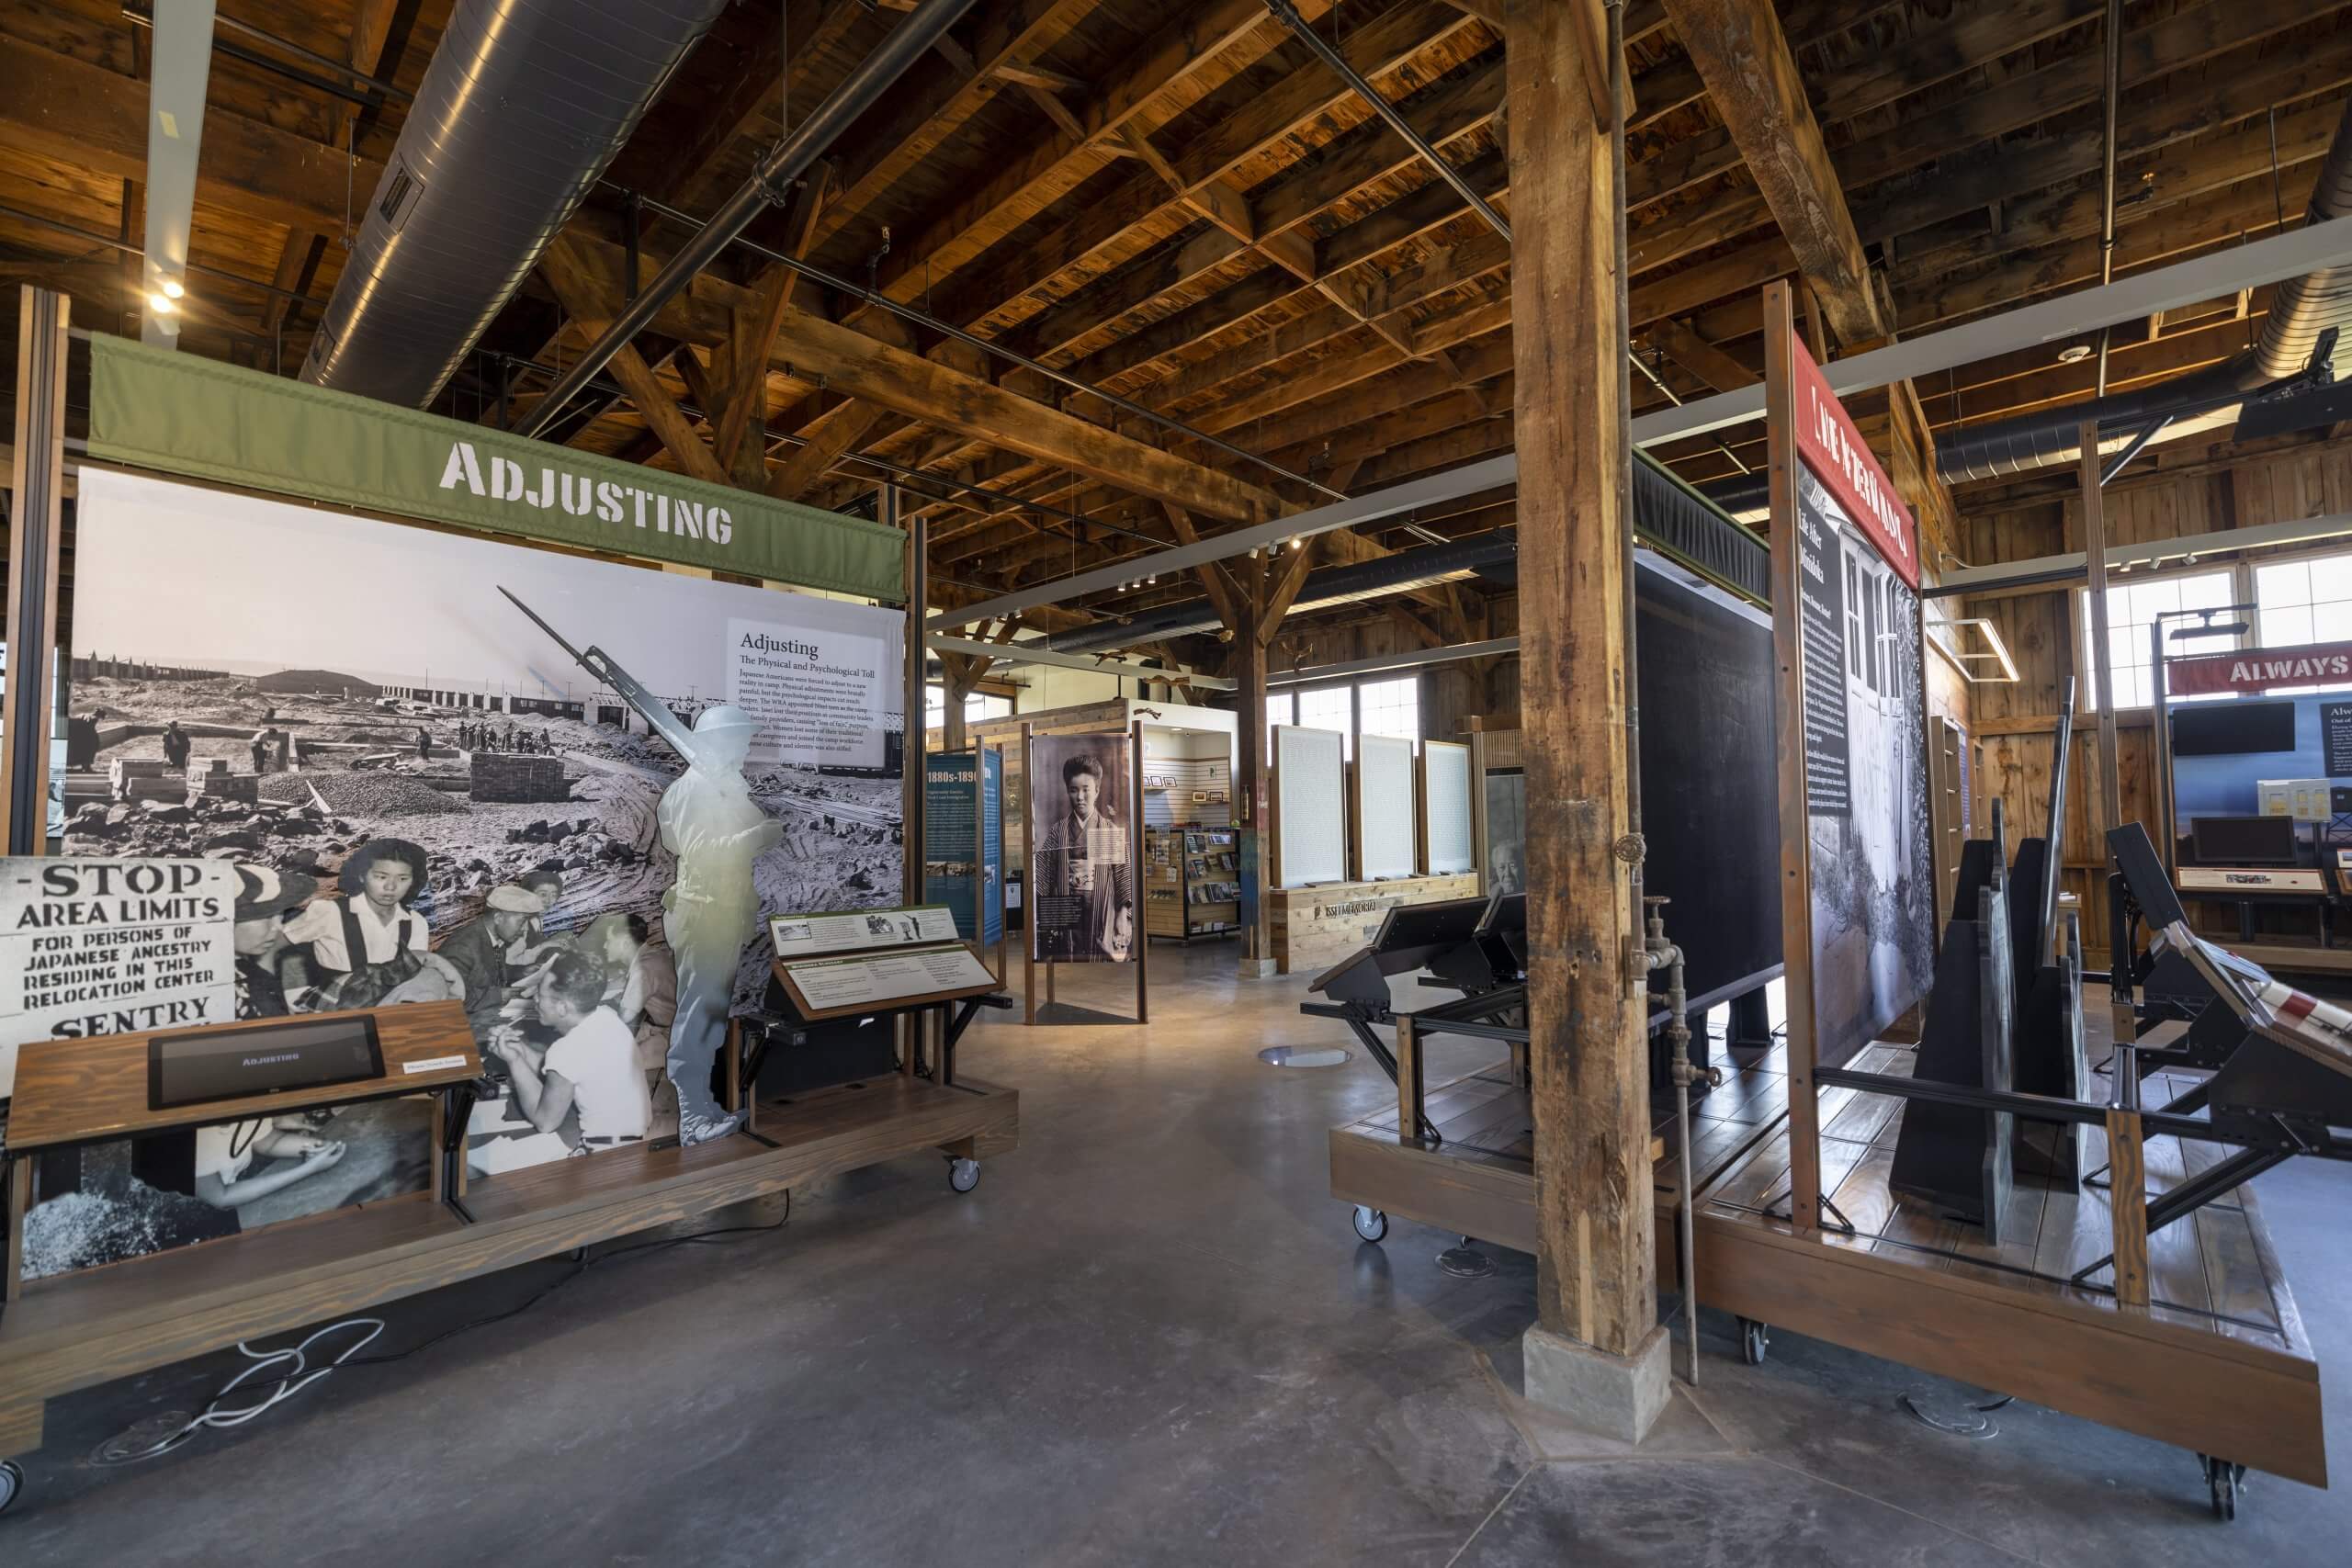 A view of the various exhibits inside the visitor center at Minidoka National Historic Site.